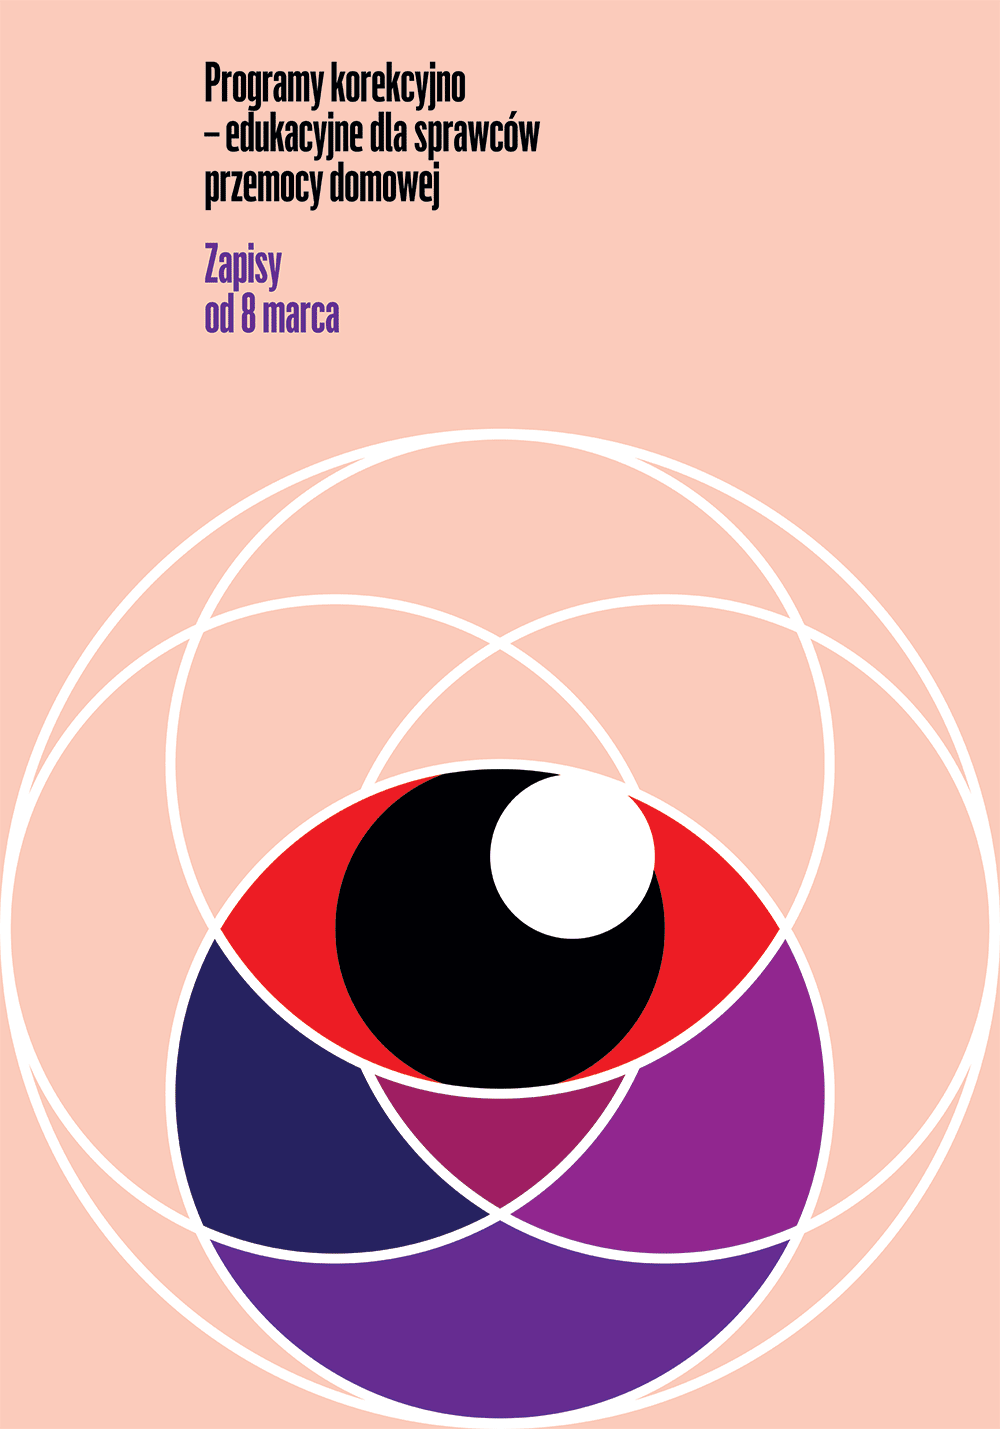 A poster showing geometric shapes that remind of an eye.